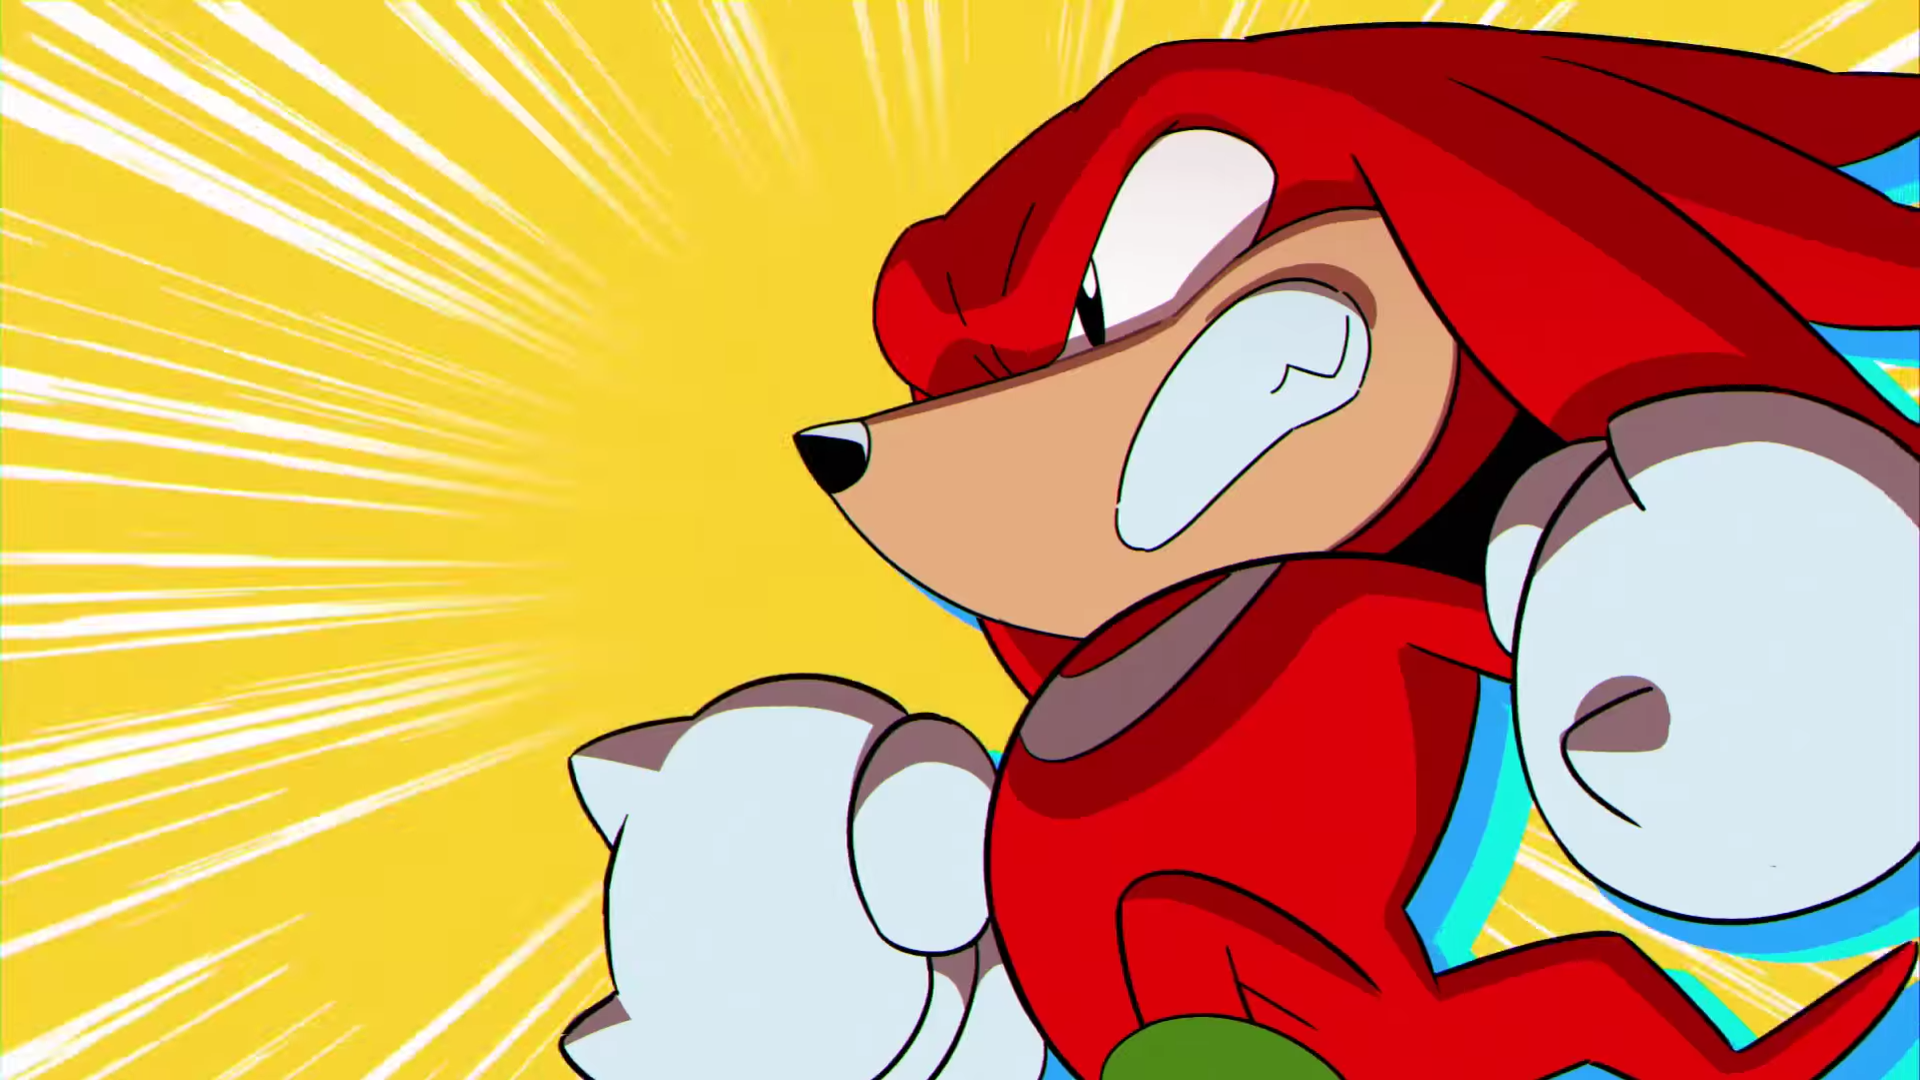 Wallpaper  1920x1200 px Knuckles Sonic Tails character 1920x1200   wallhaven  1423461  HD Wallpapers  WallHere